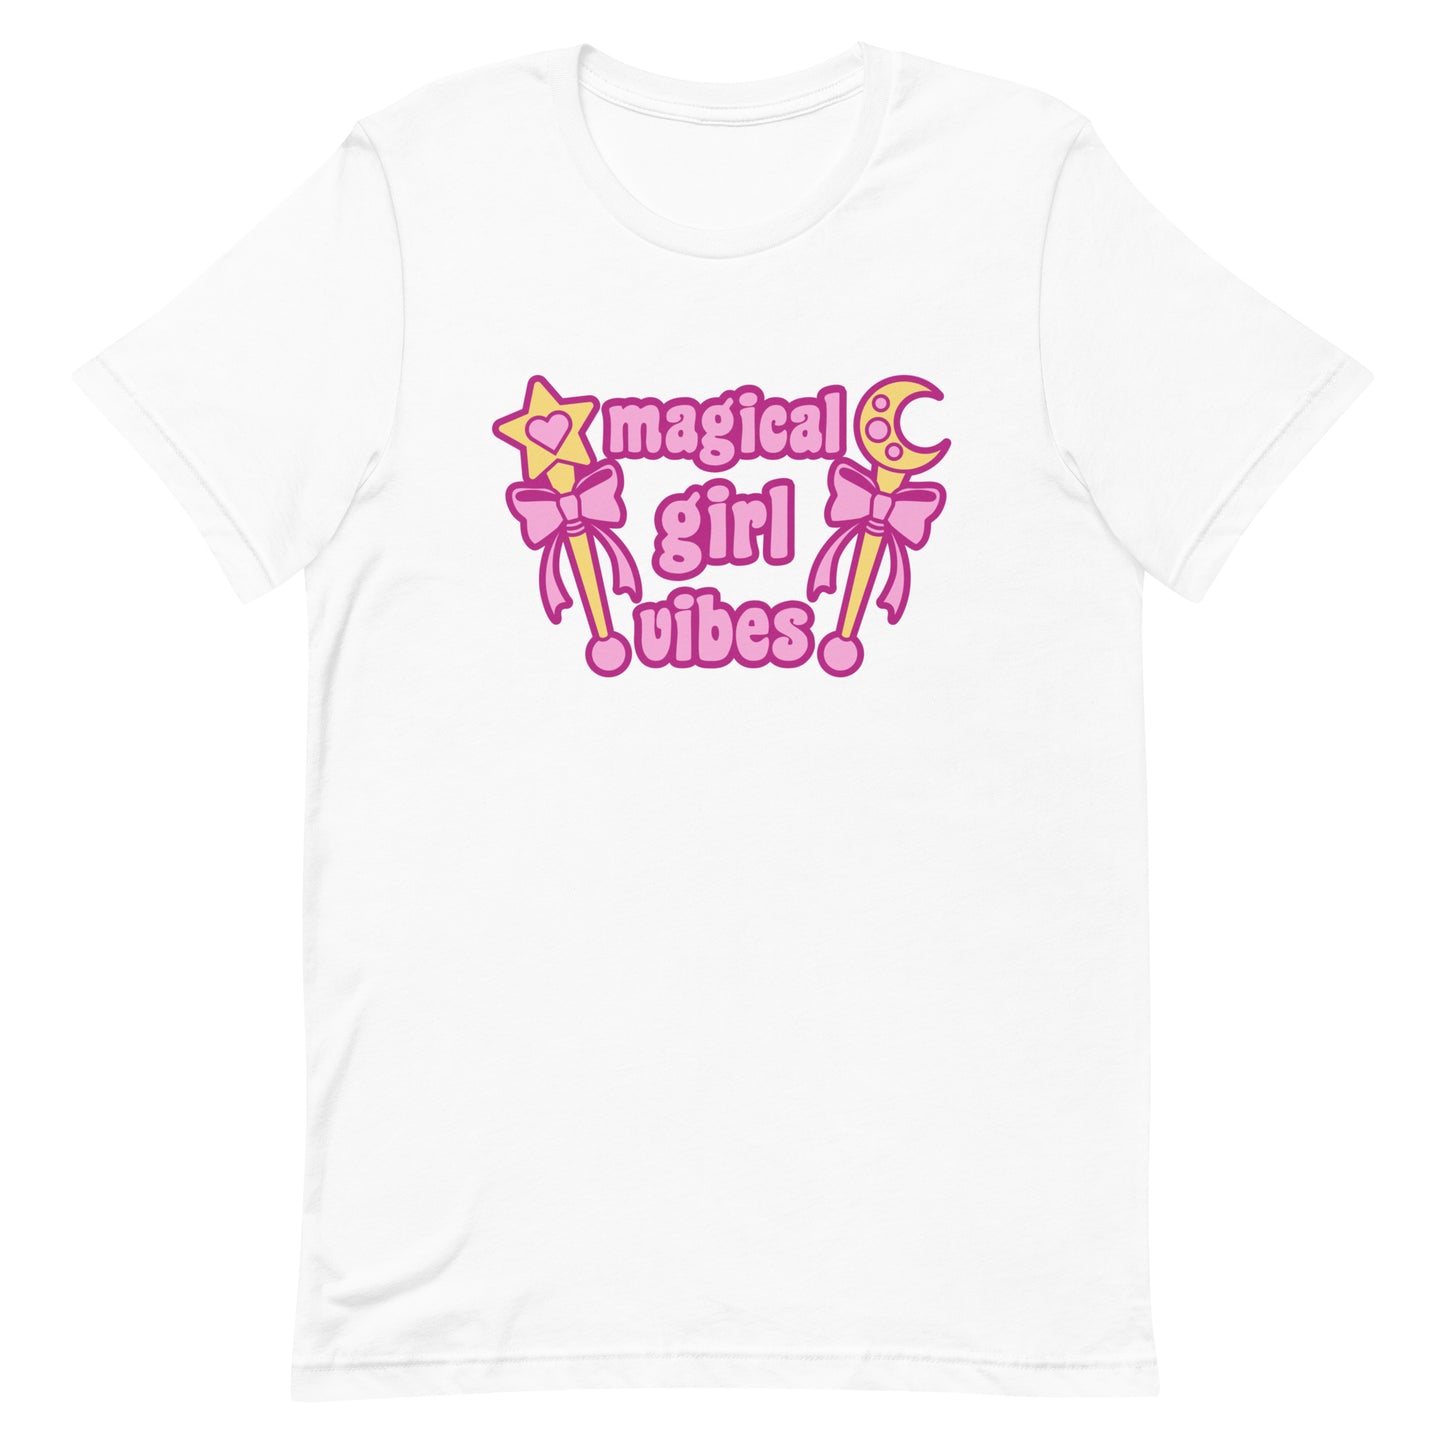 A white crewneck t-shirt featuring two gold wands with pink bows and pink text reading "Magical girl vibes"